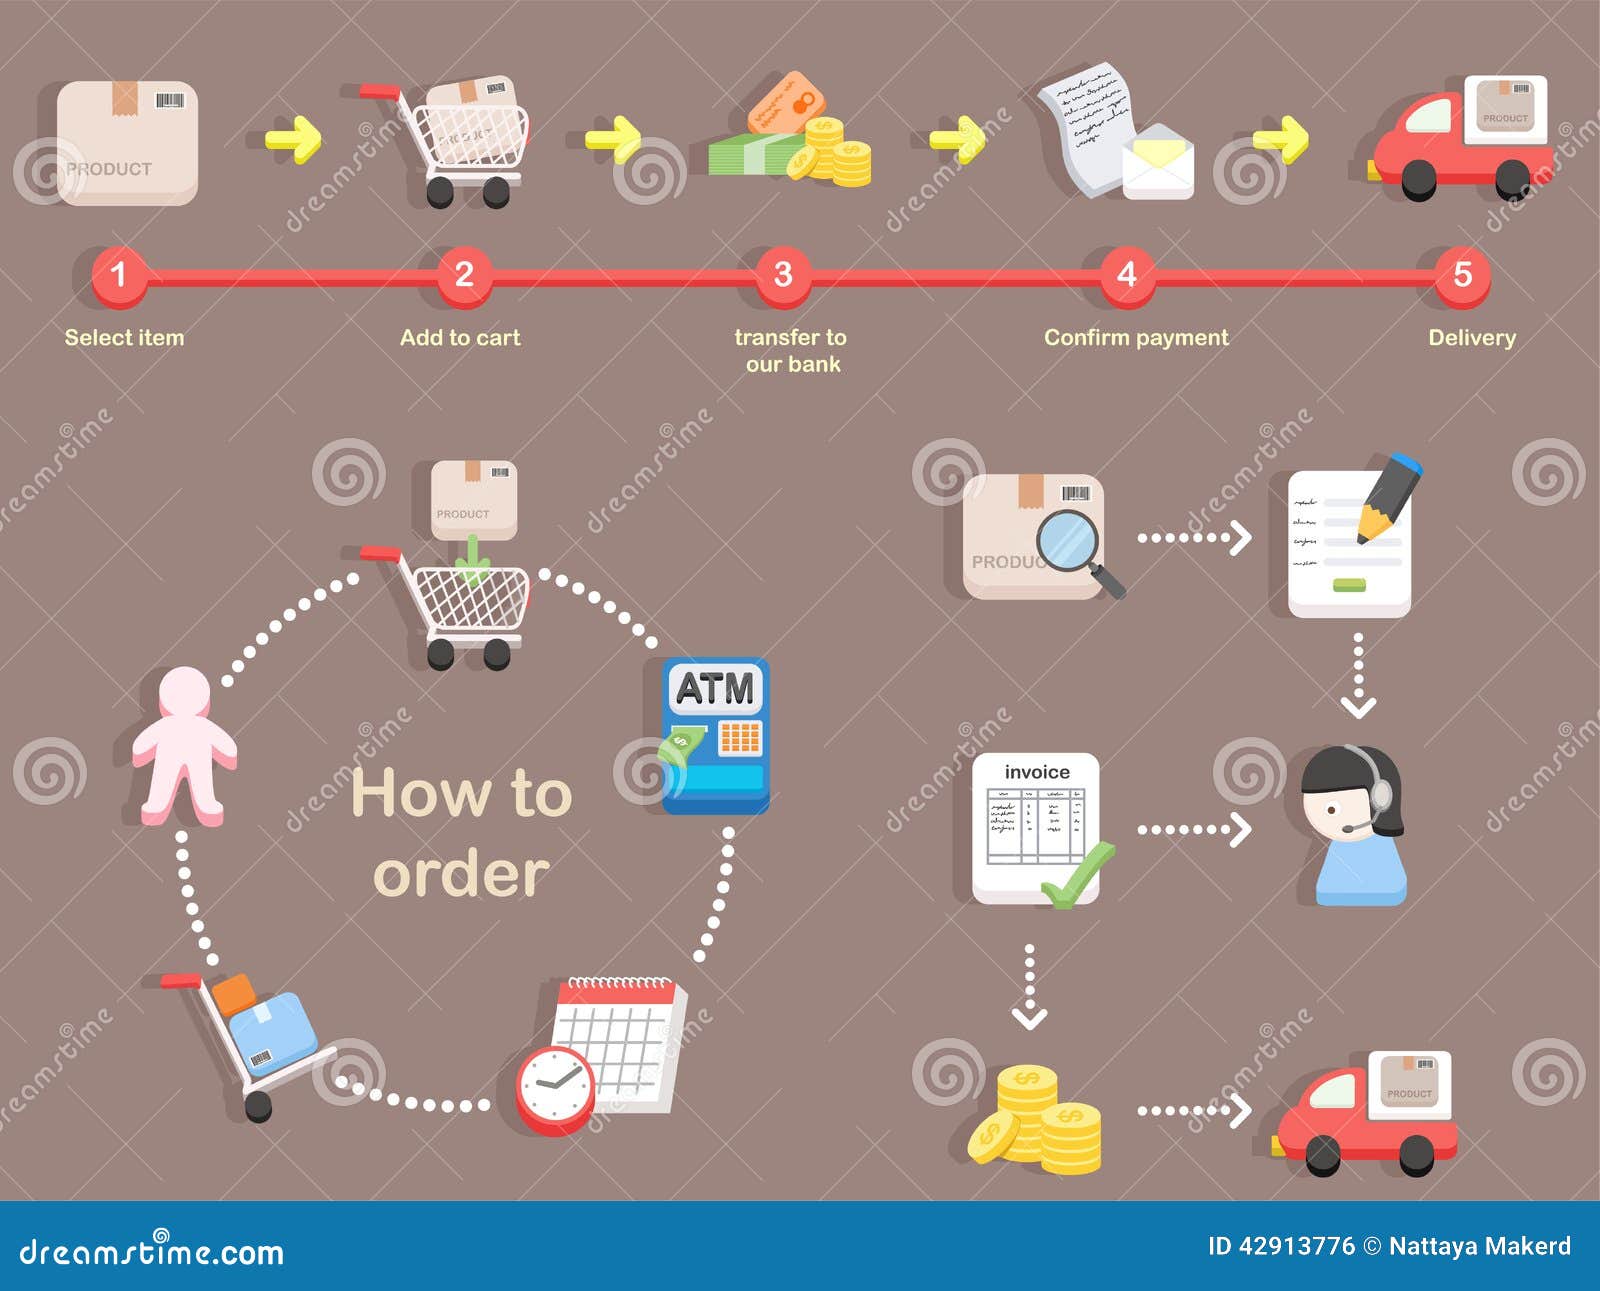 how to order - shopping process of purchasing